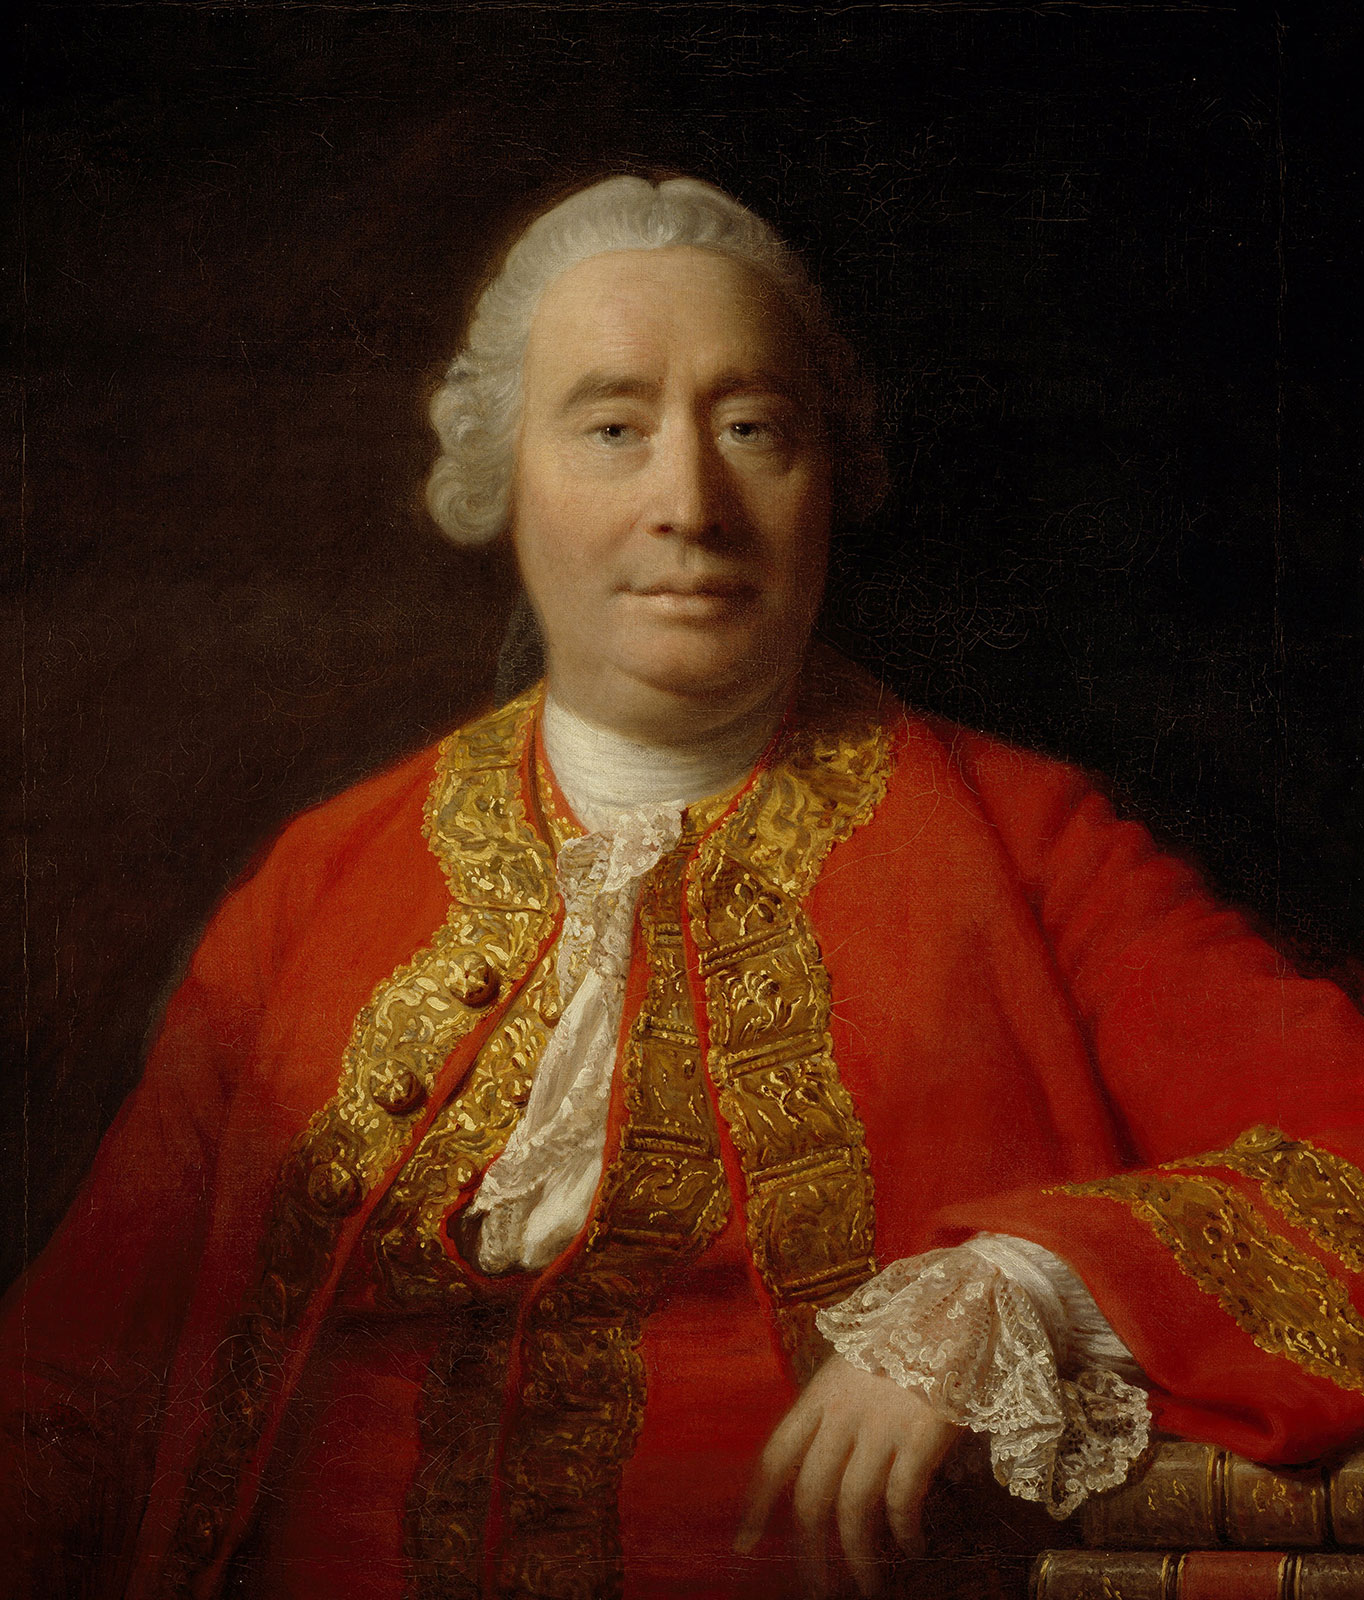 David Hume | Biography, Philosophy, Works, & Facts | Britannica